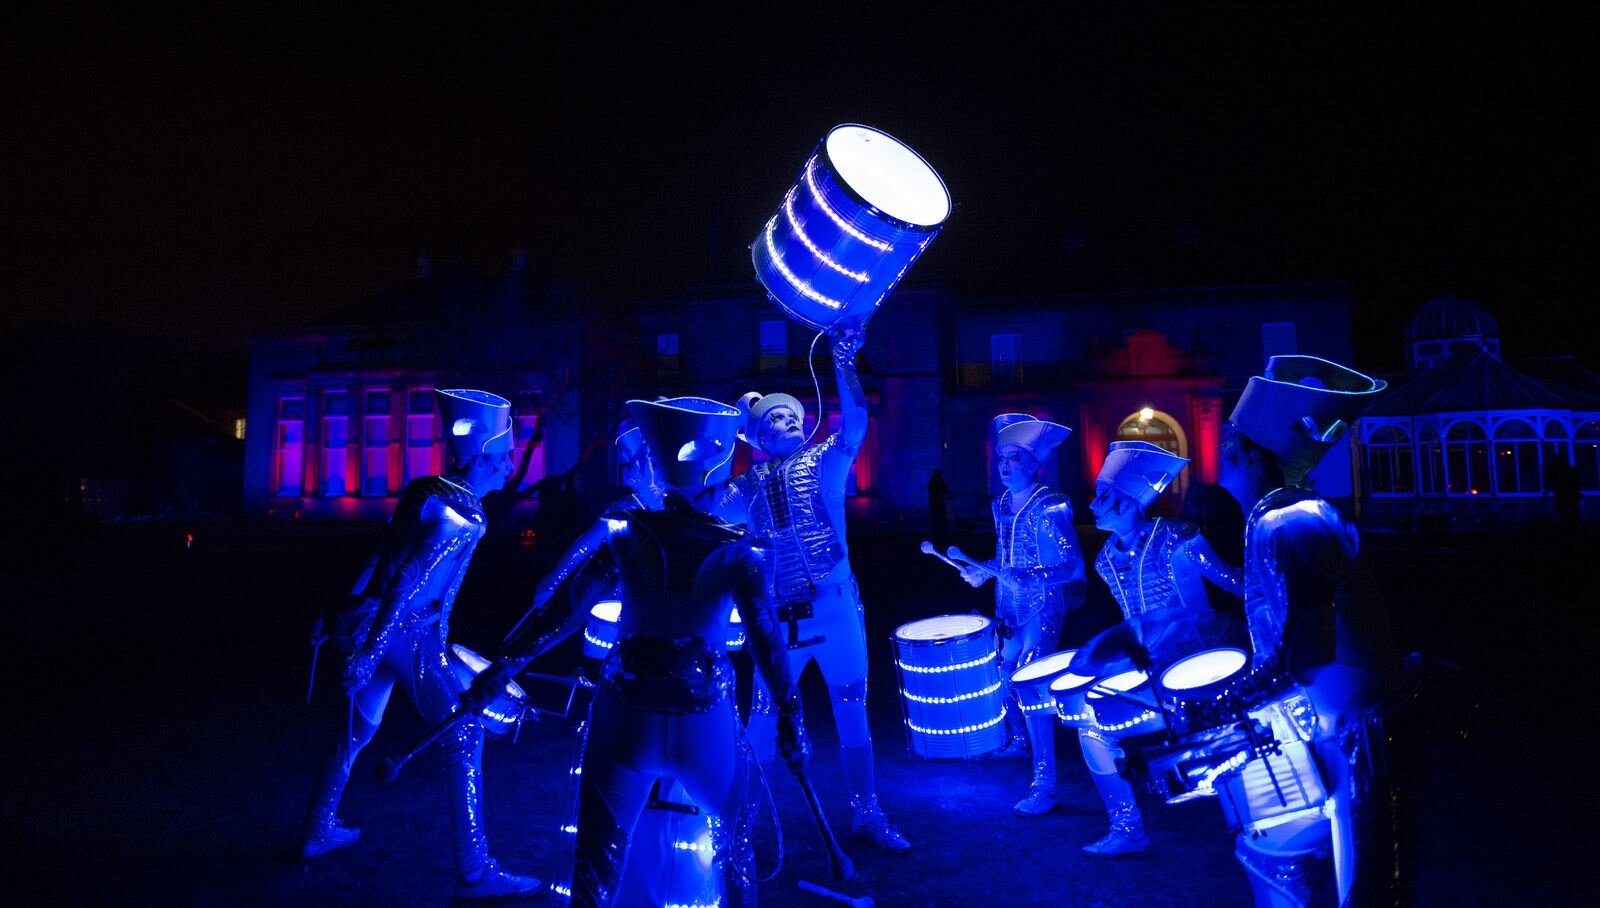 LED Drummers performing at event